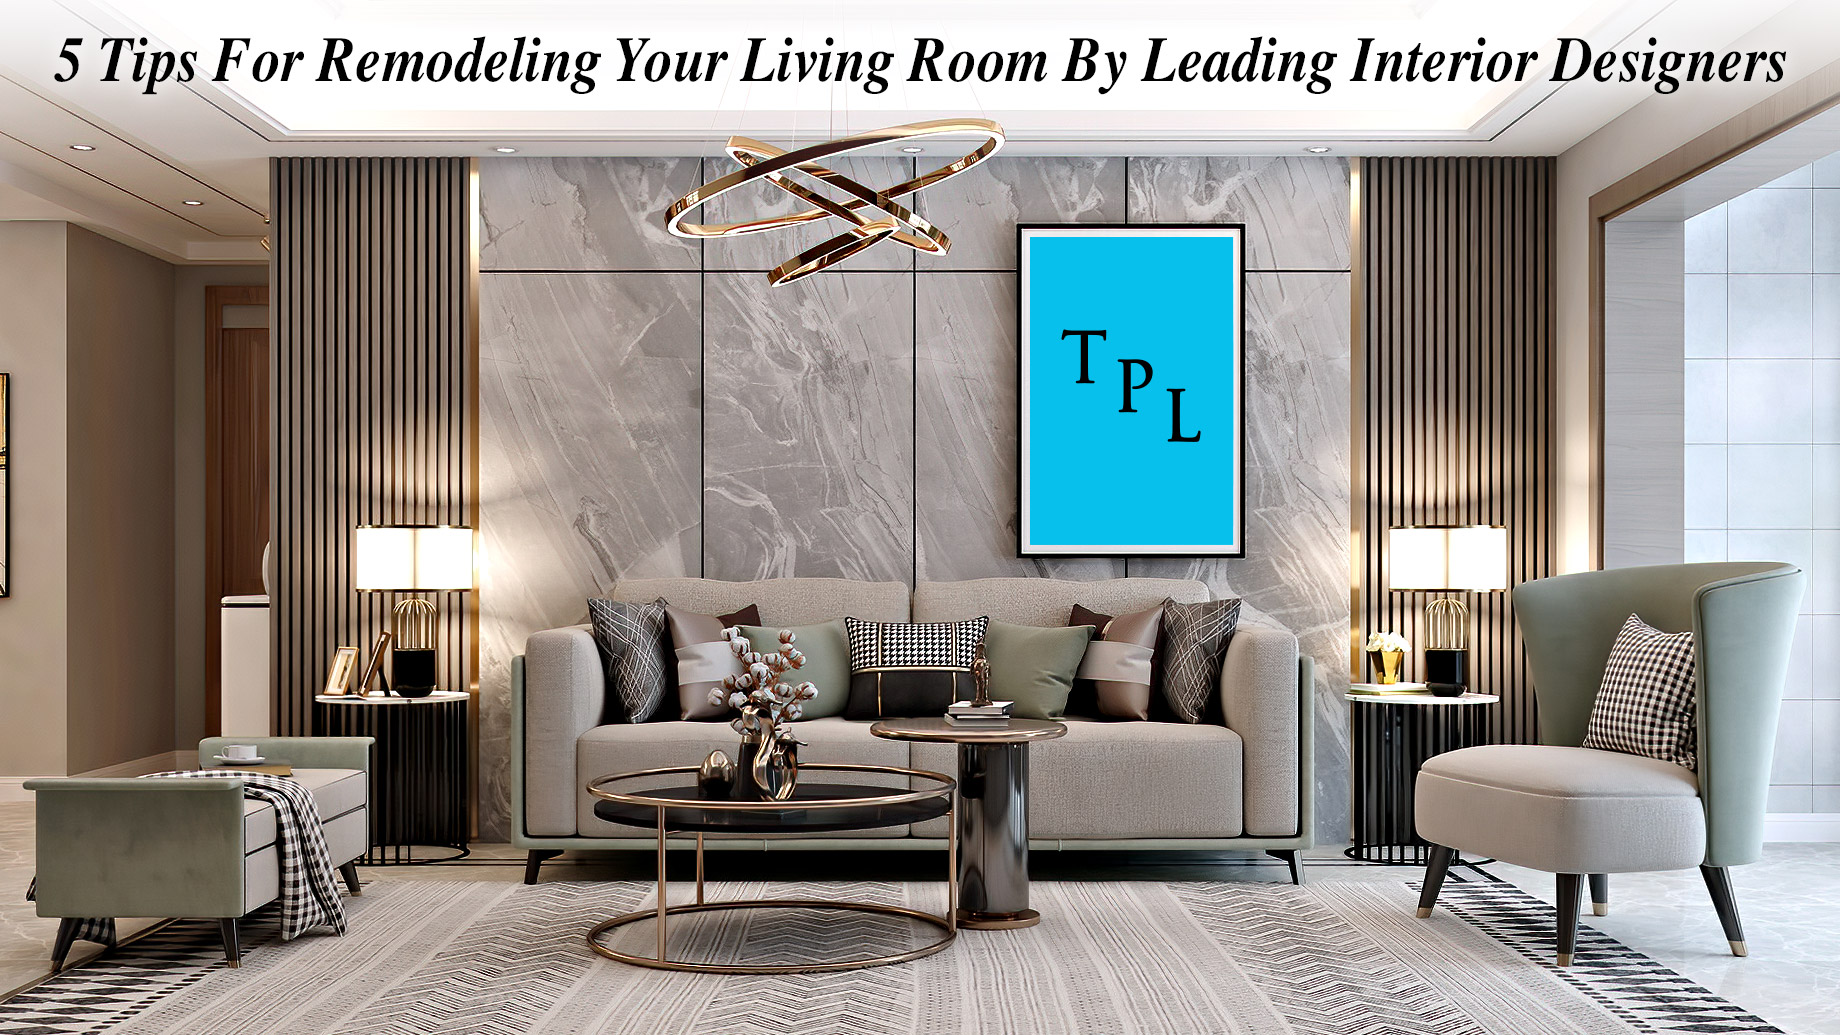 5 Tips For Remodeling Your Living Room By Leading Interior Designers